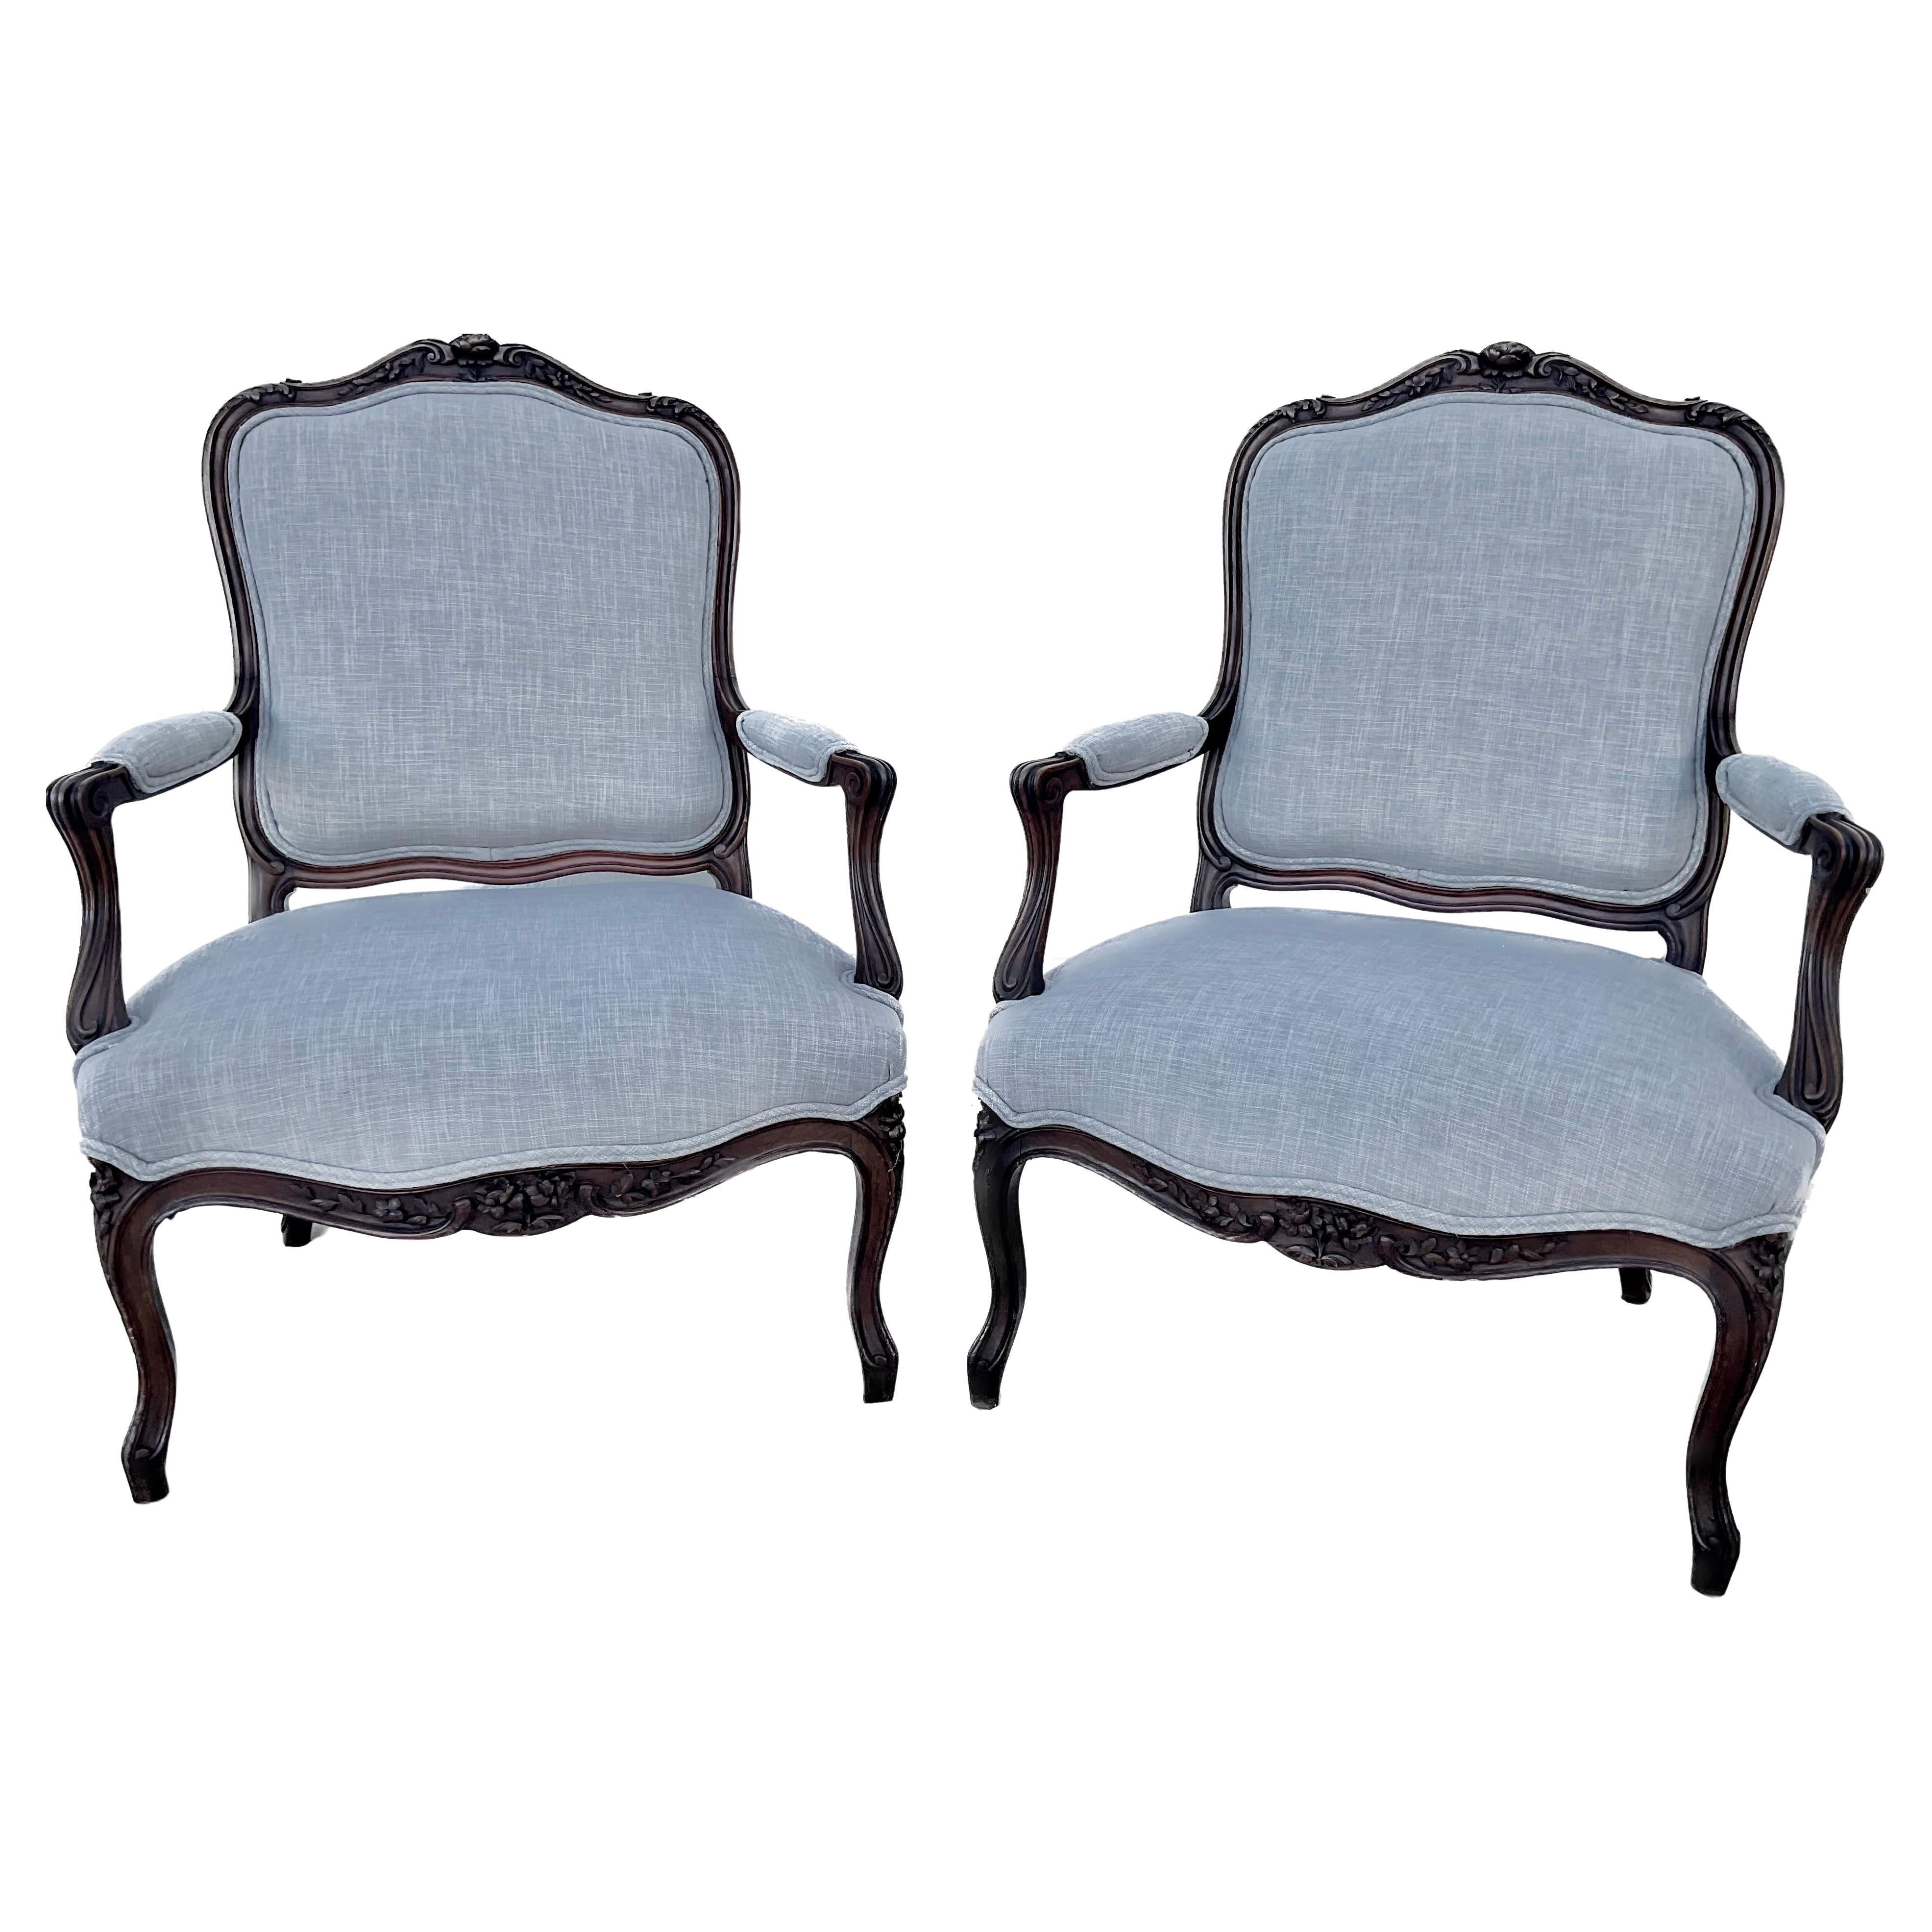 Pair of 19th Century French Louis XV Carved Wood And Upholstered Arm Chairs